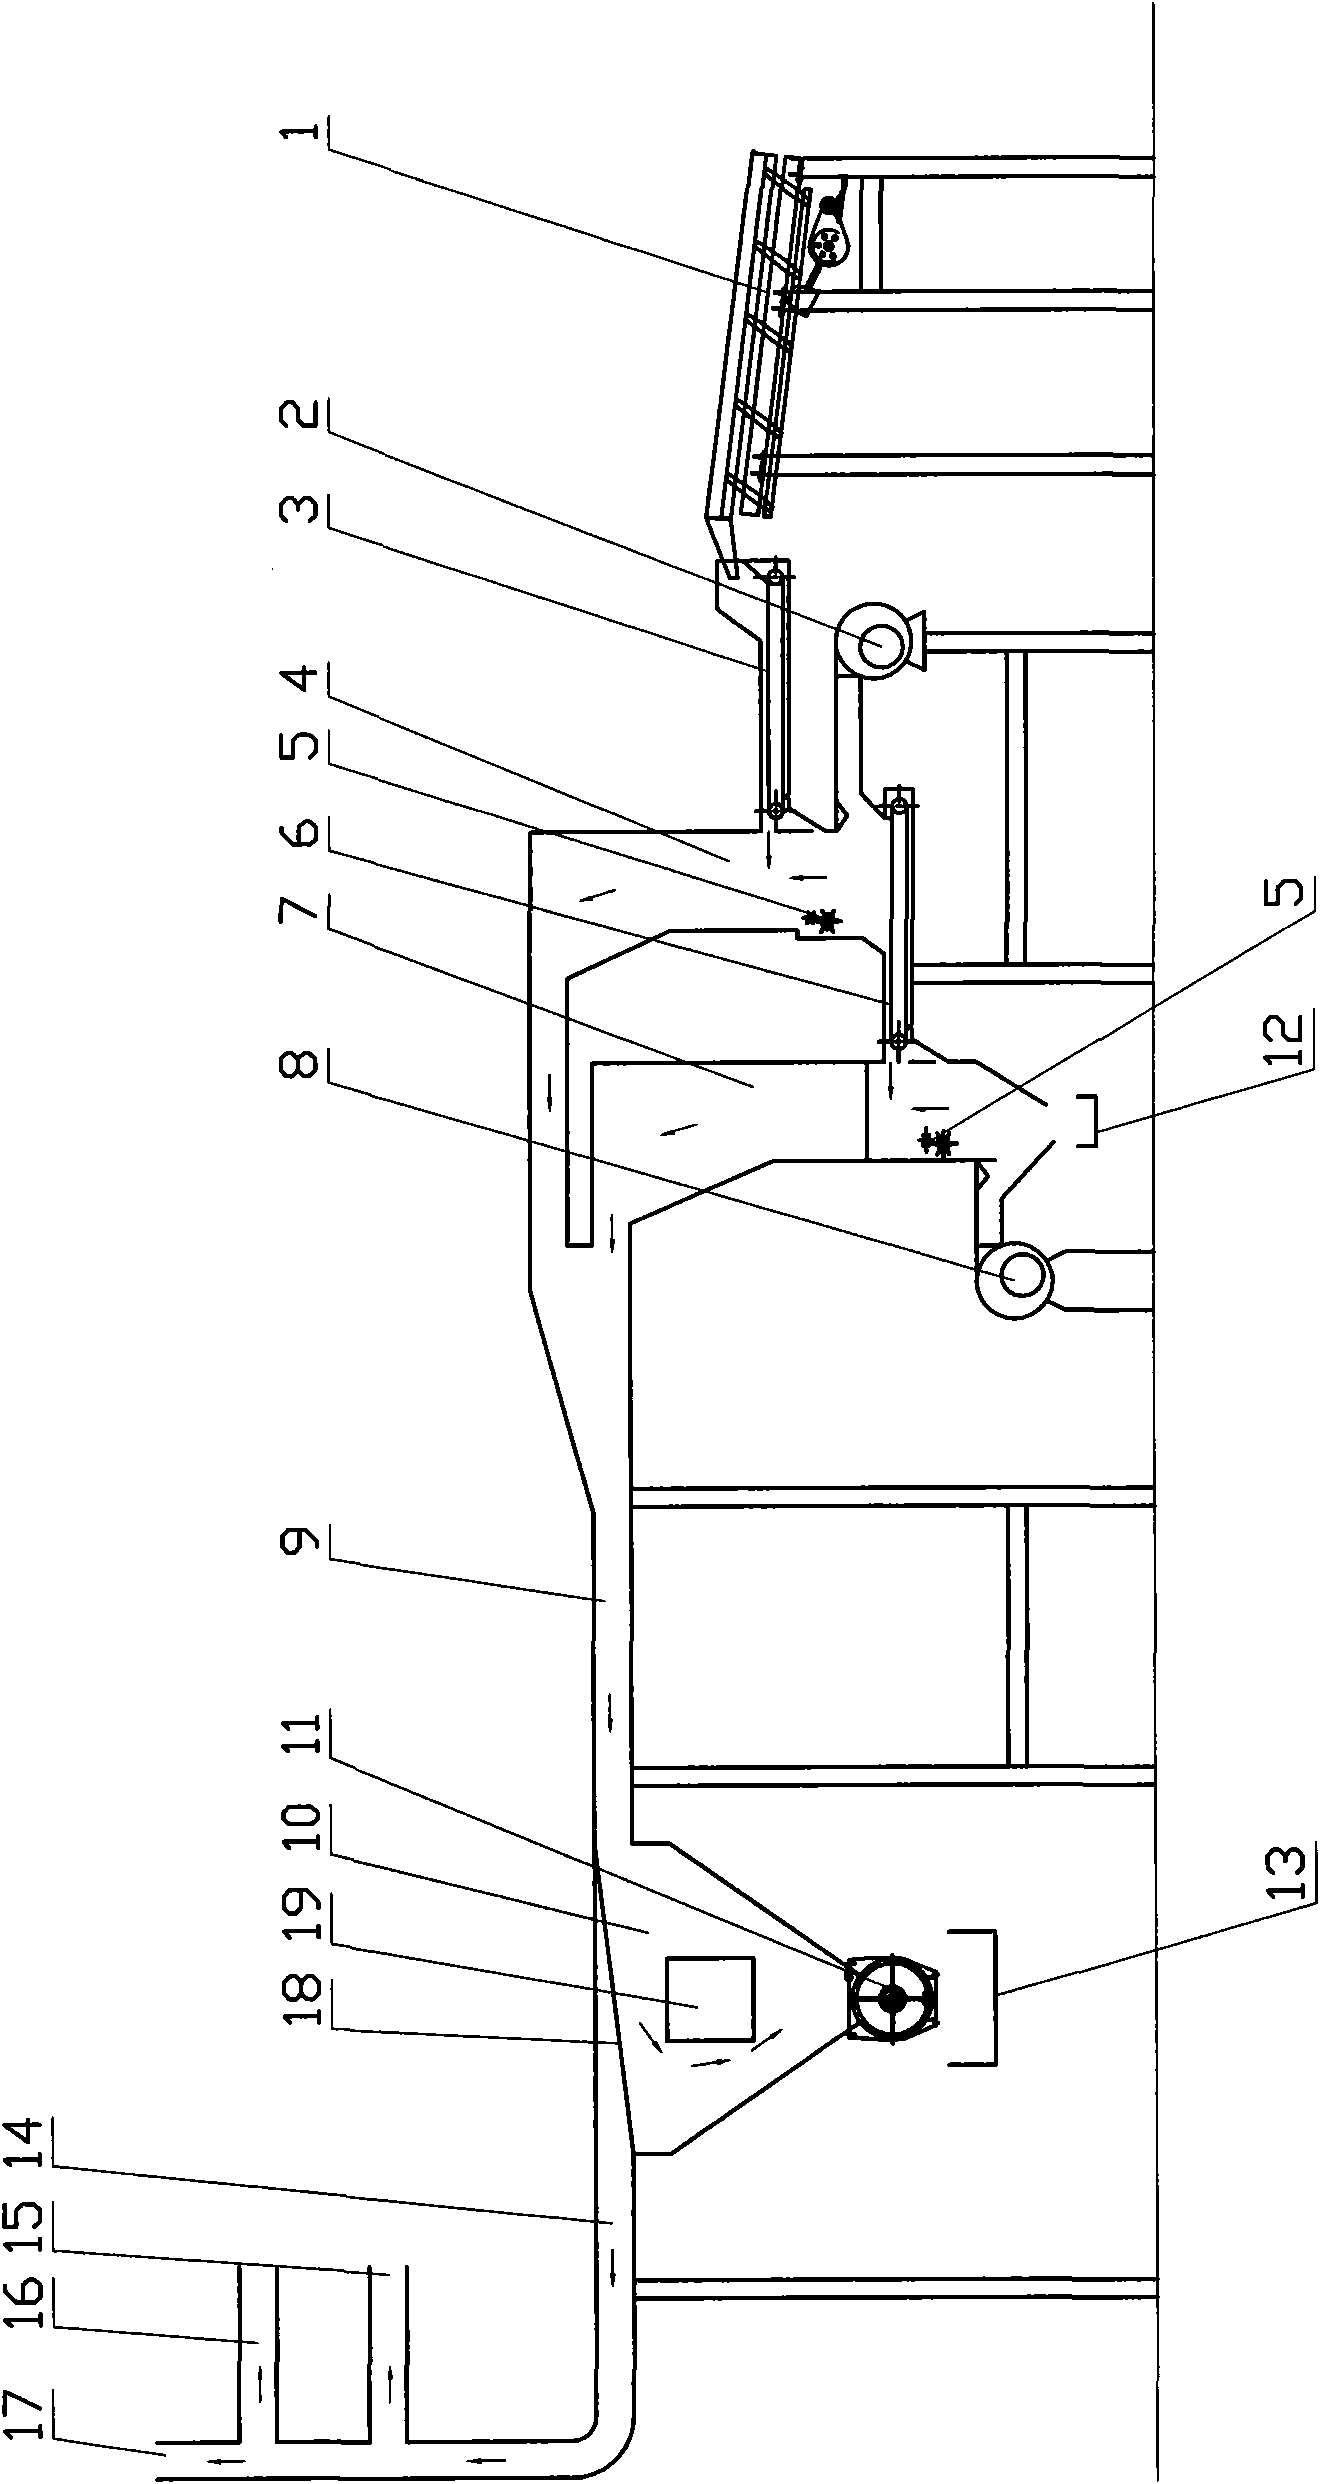 Multistage pneumatic separation device for eliminating stems from tobacco shreds